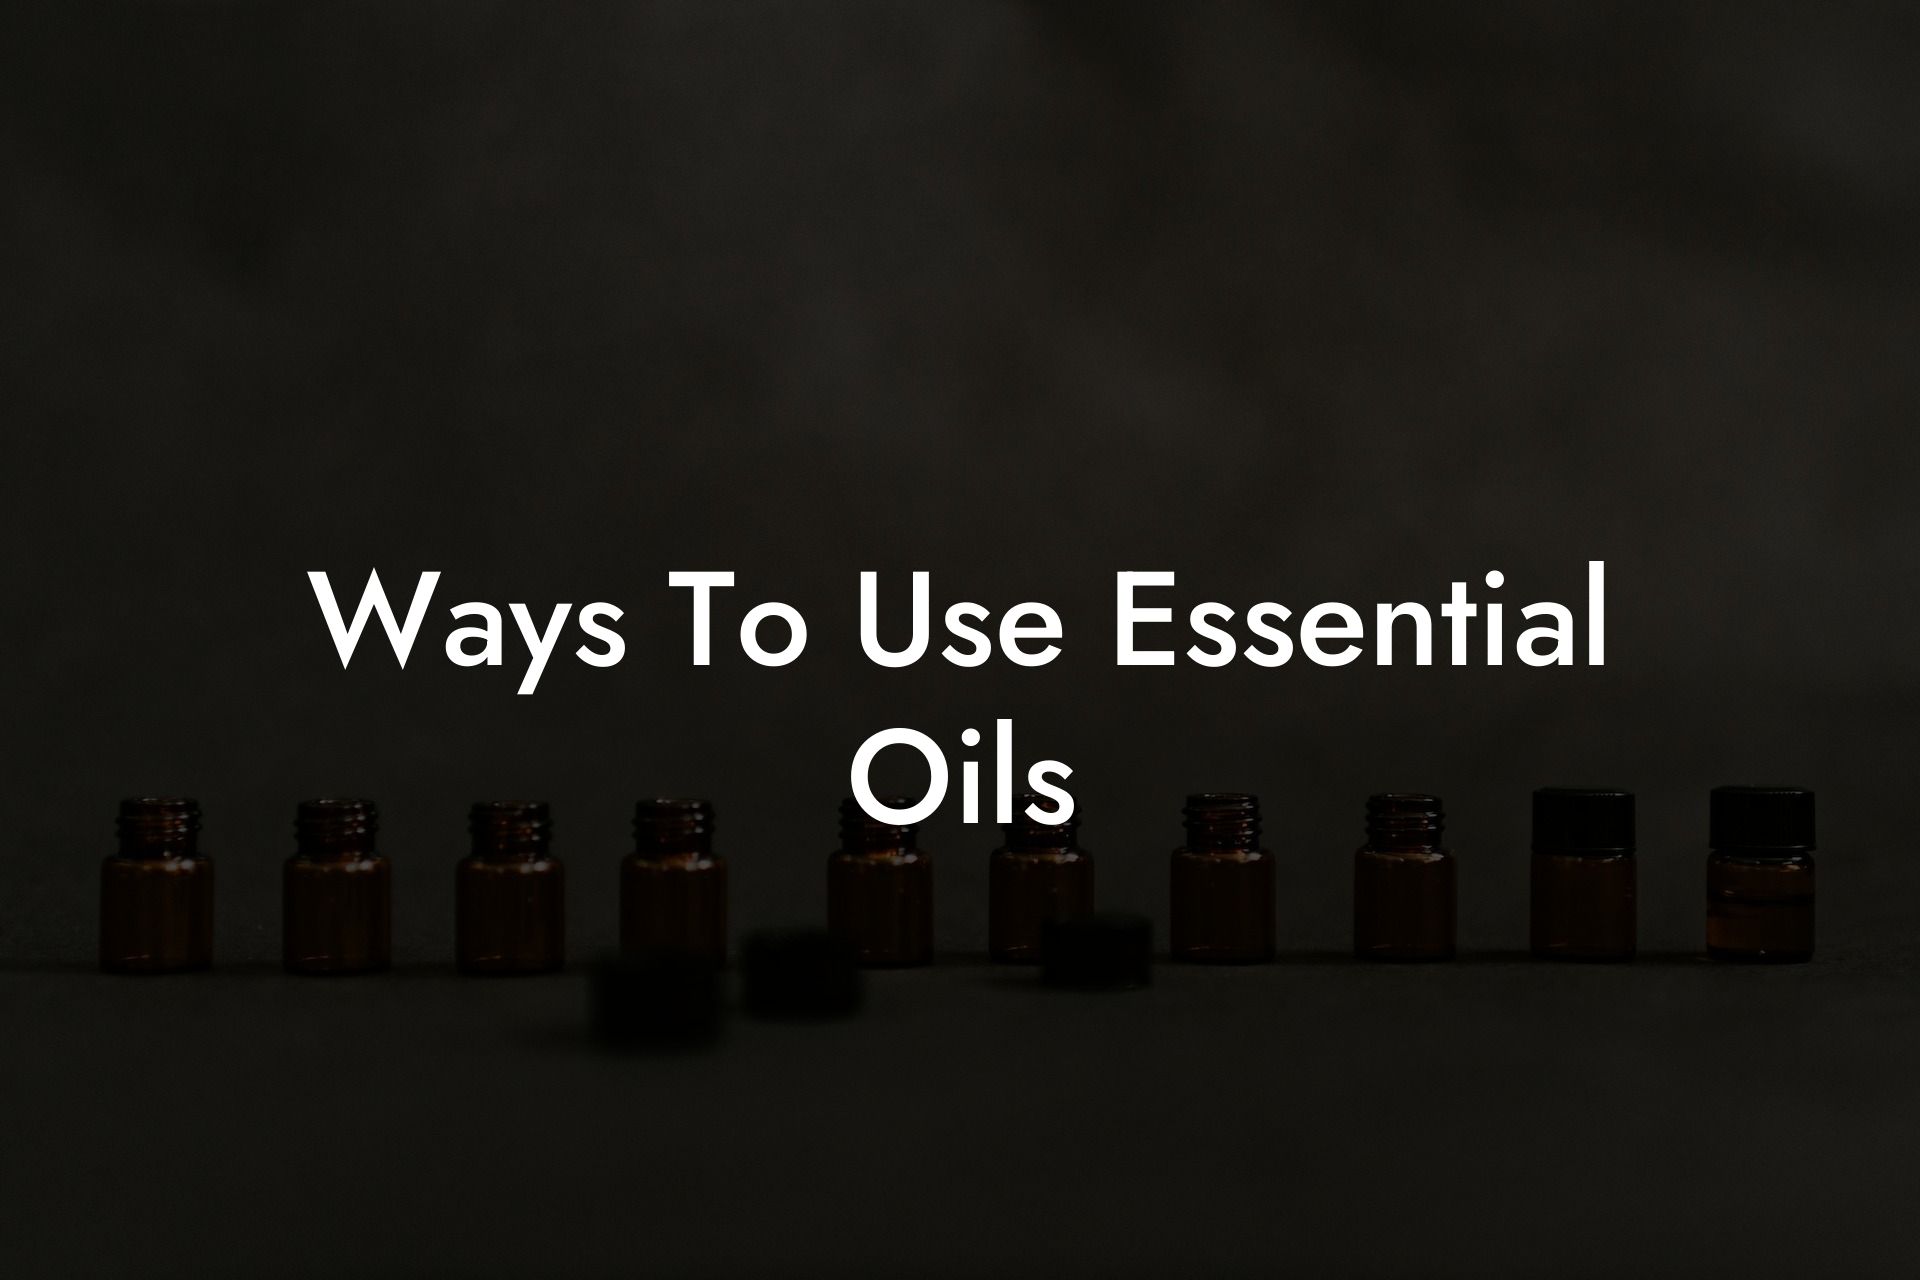 Ways To Use Essential Oils